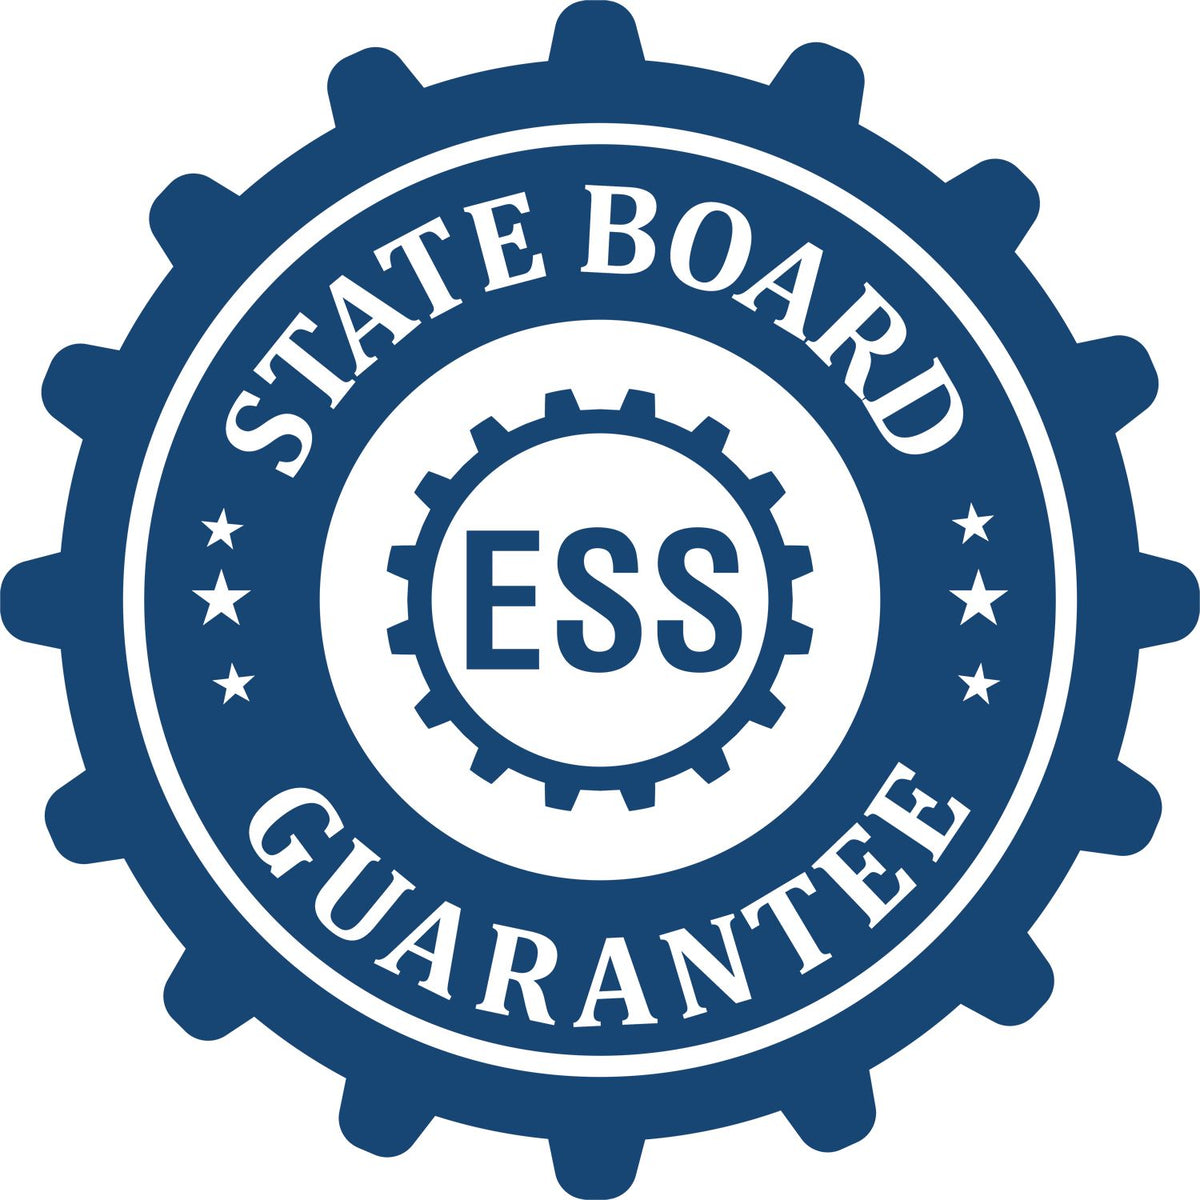 An emblem in a gear shape illustrating a state board guarantee for the Virginia Professional Geologist Seal Stamp